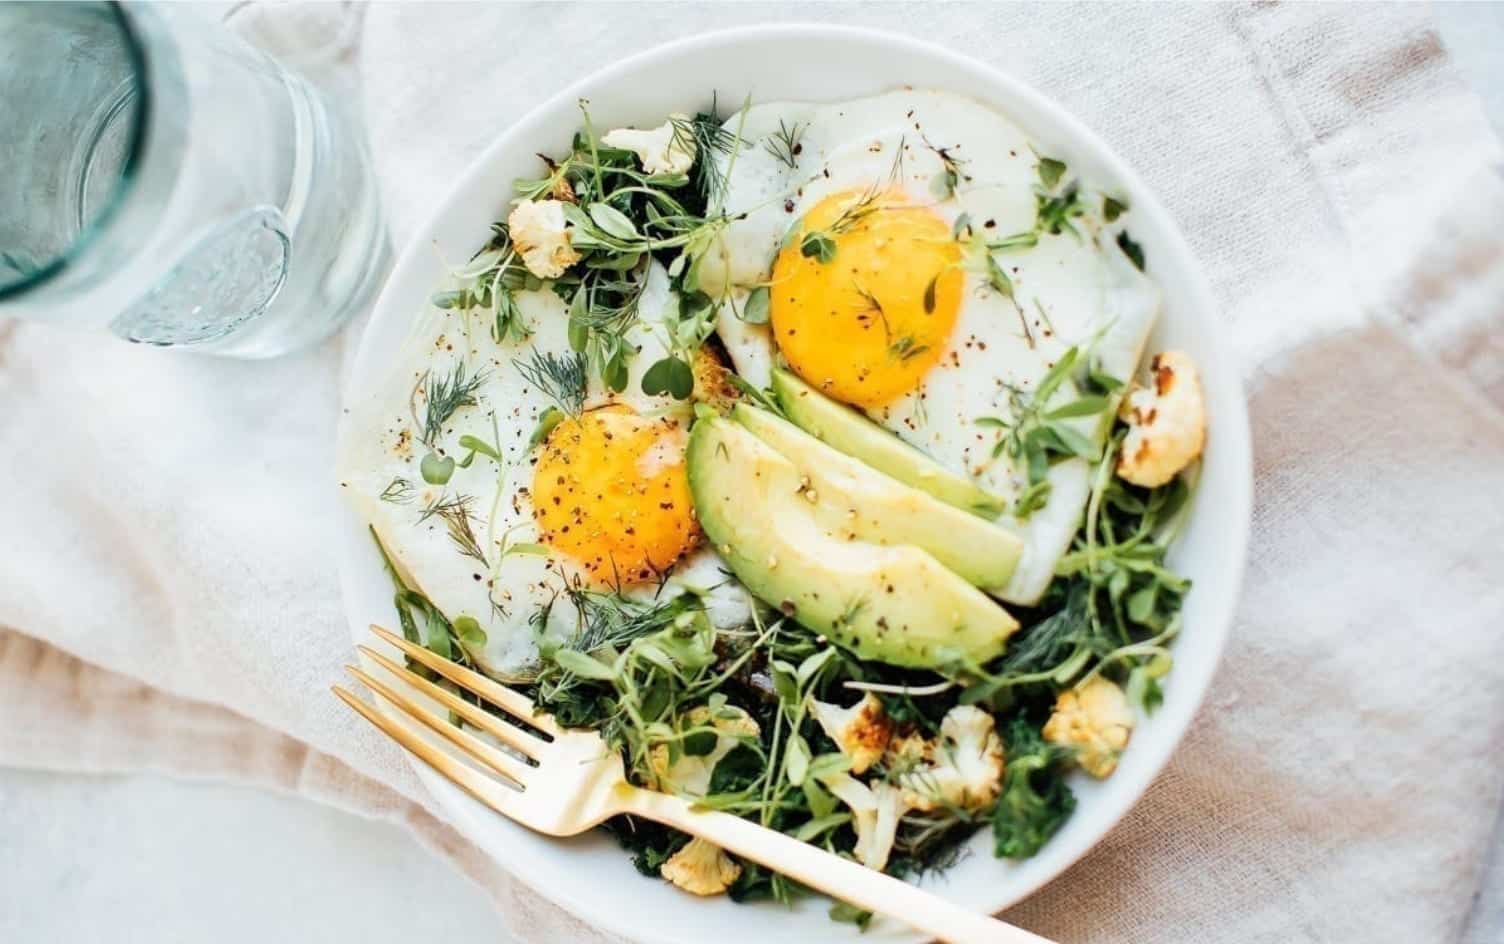 15 Breakfasts With up to 20 Grams of Net Carbs